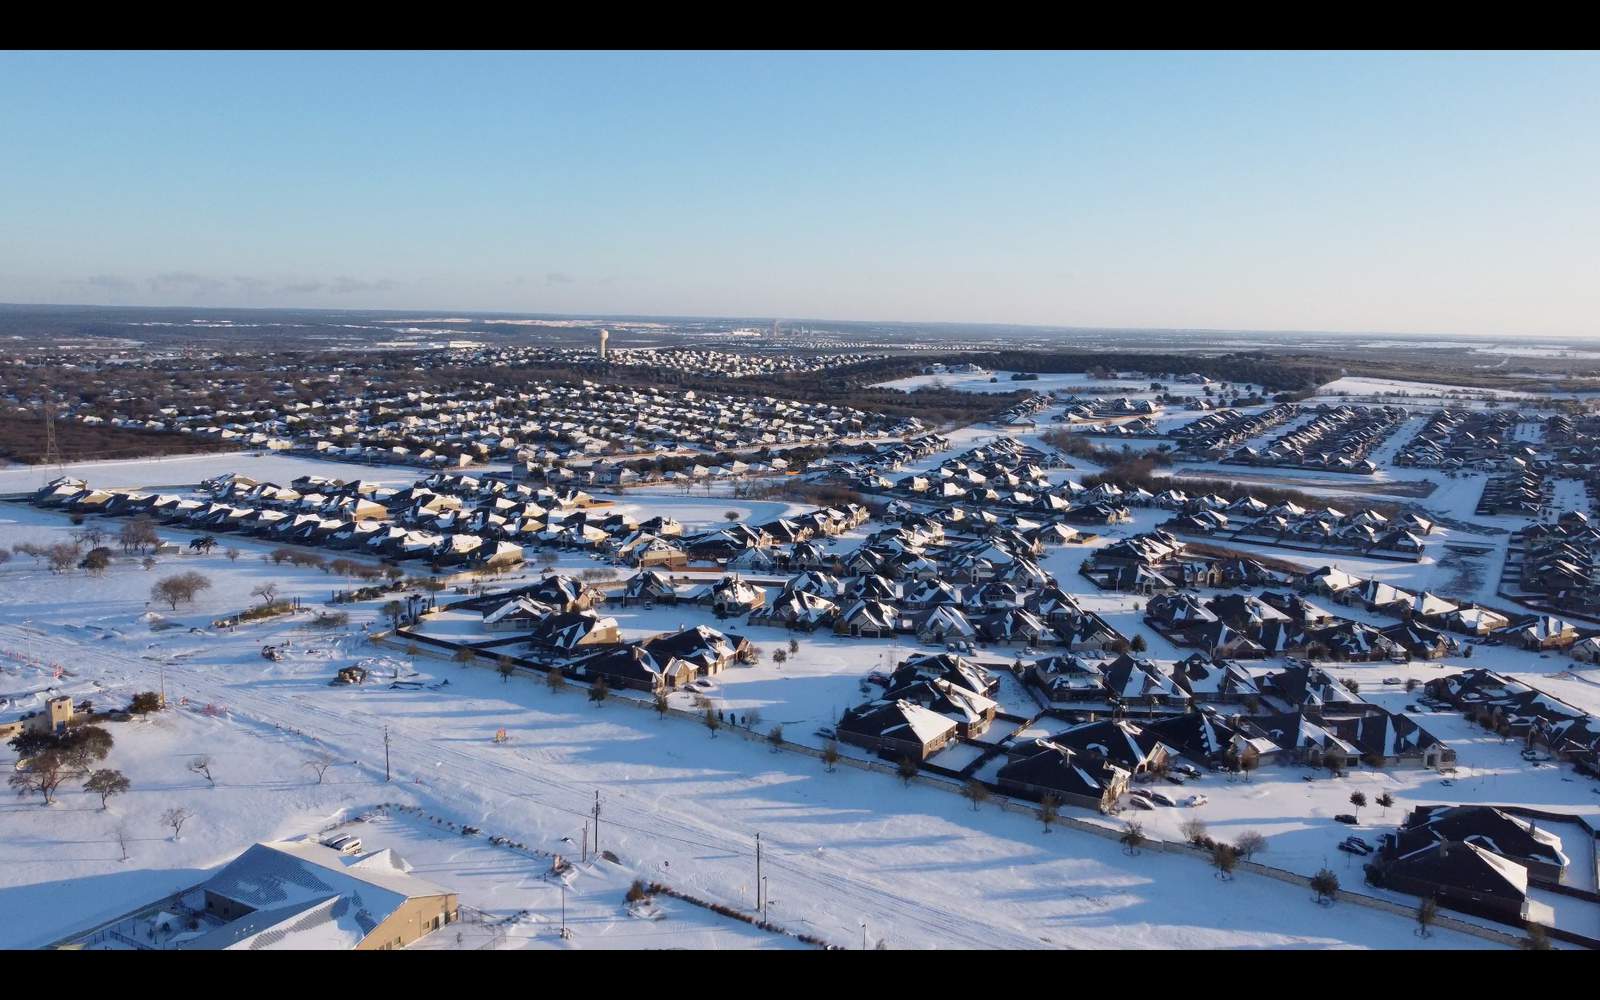 Aerial images show winter wonderland in San Antonio, surrounding areas after snowfall